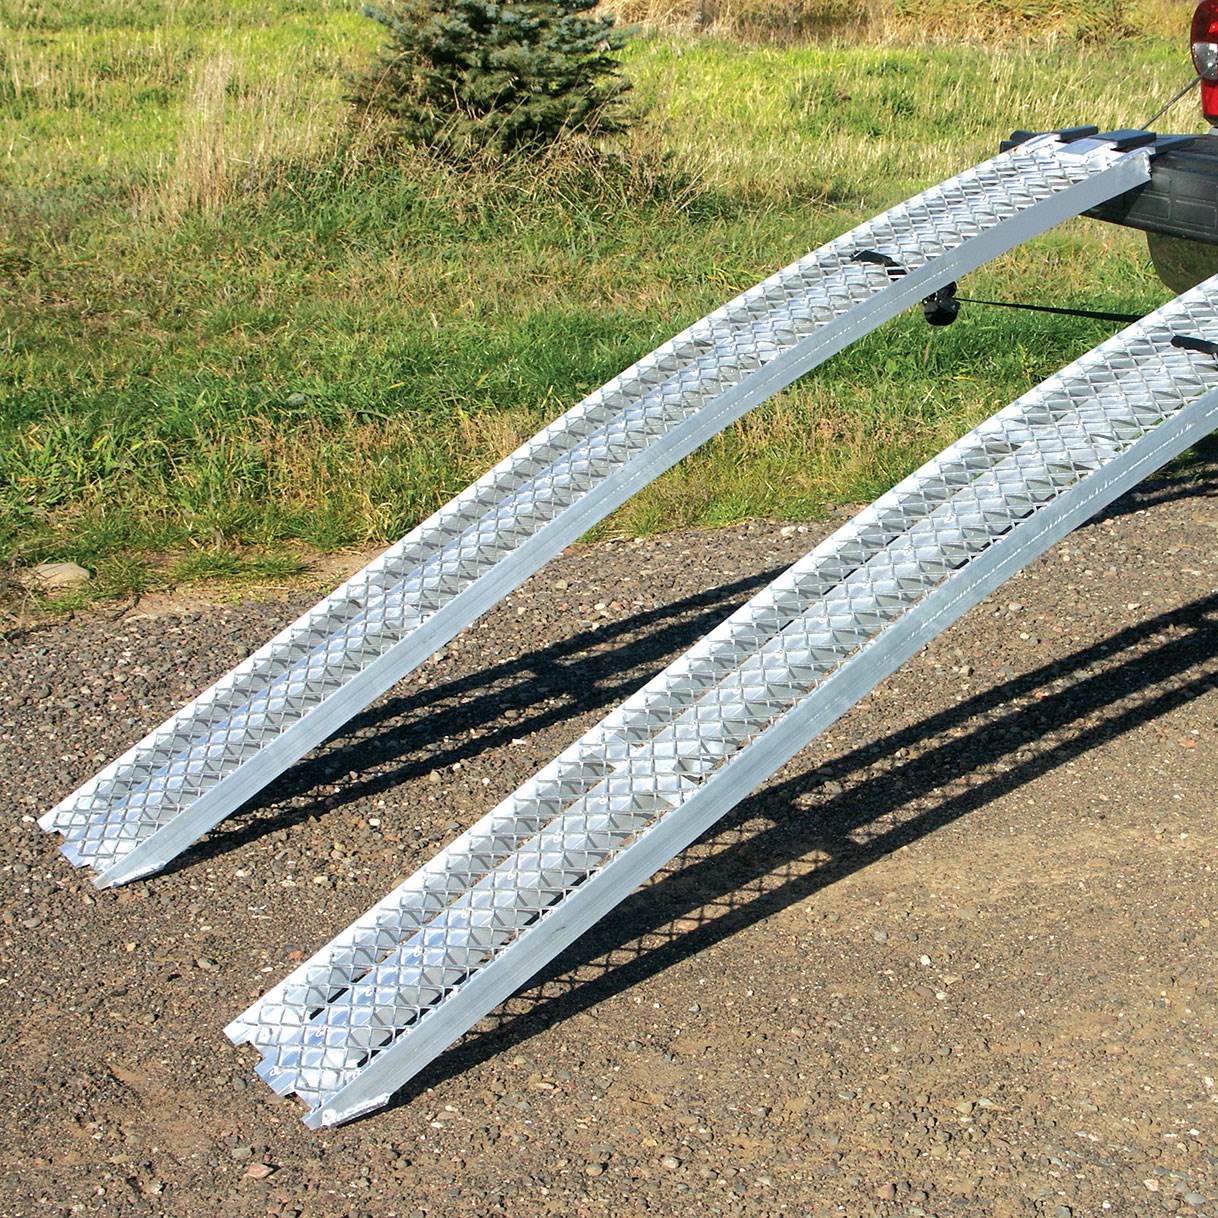 arched aluminum atv loading ramps of 2008